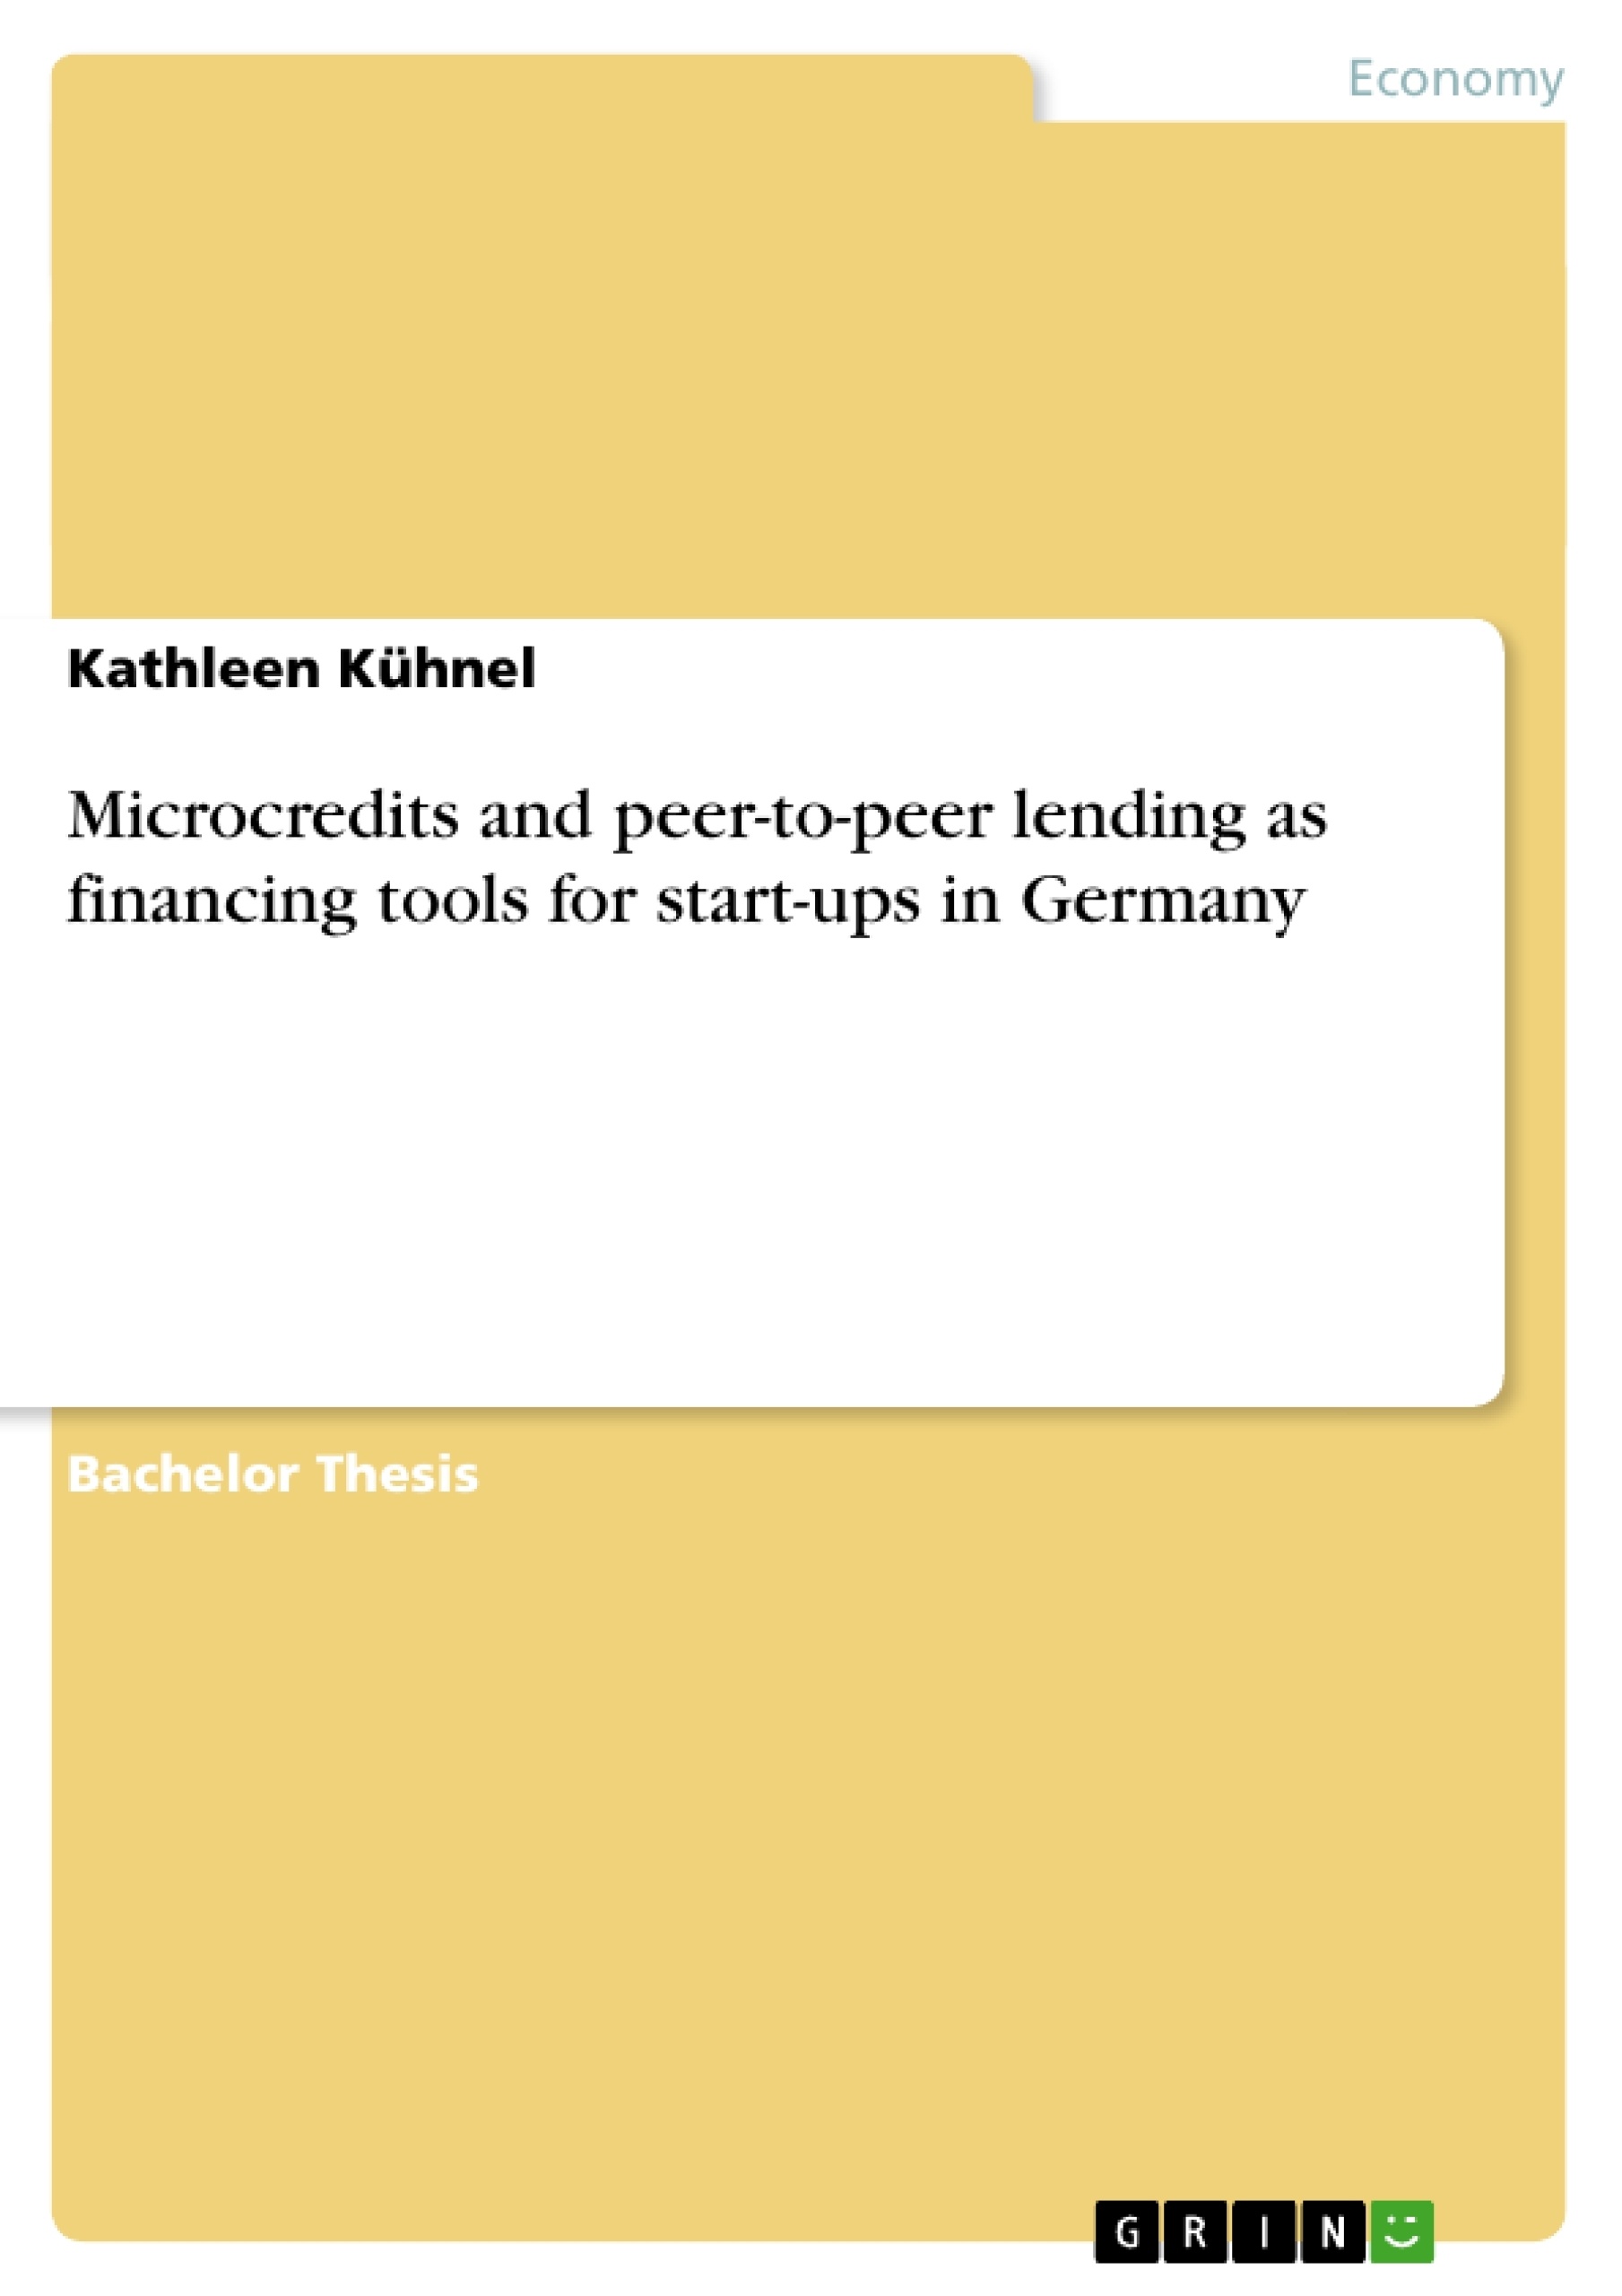 Título: Microcredits and peer-to-peer lending as financing tools for start-ups in Germany